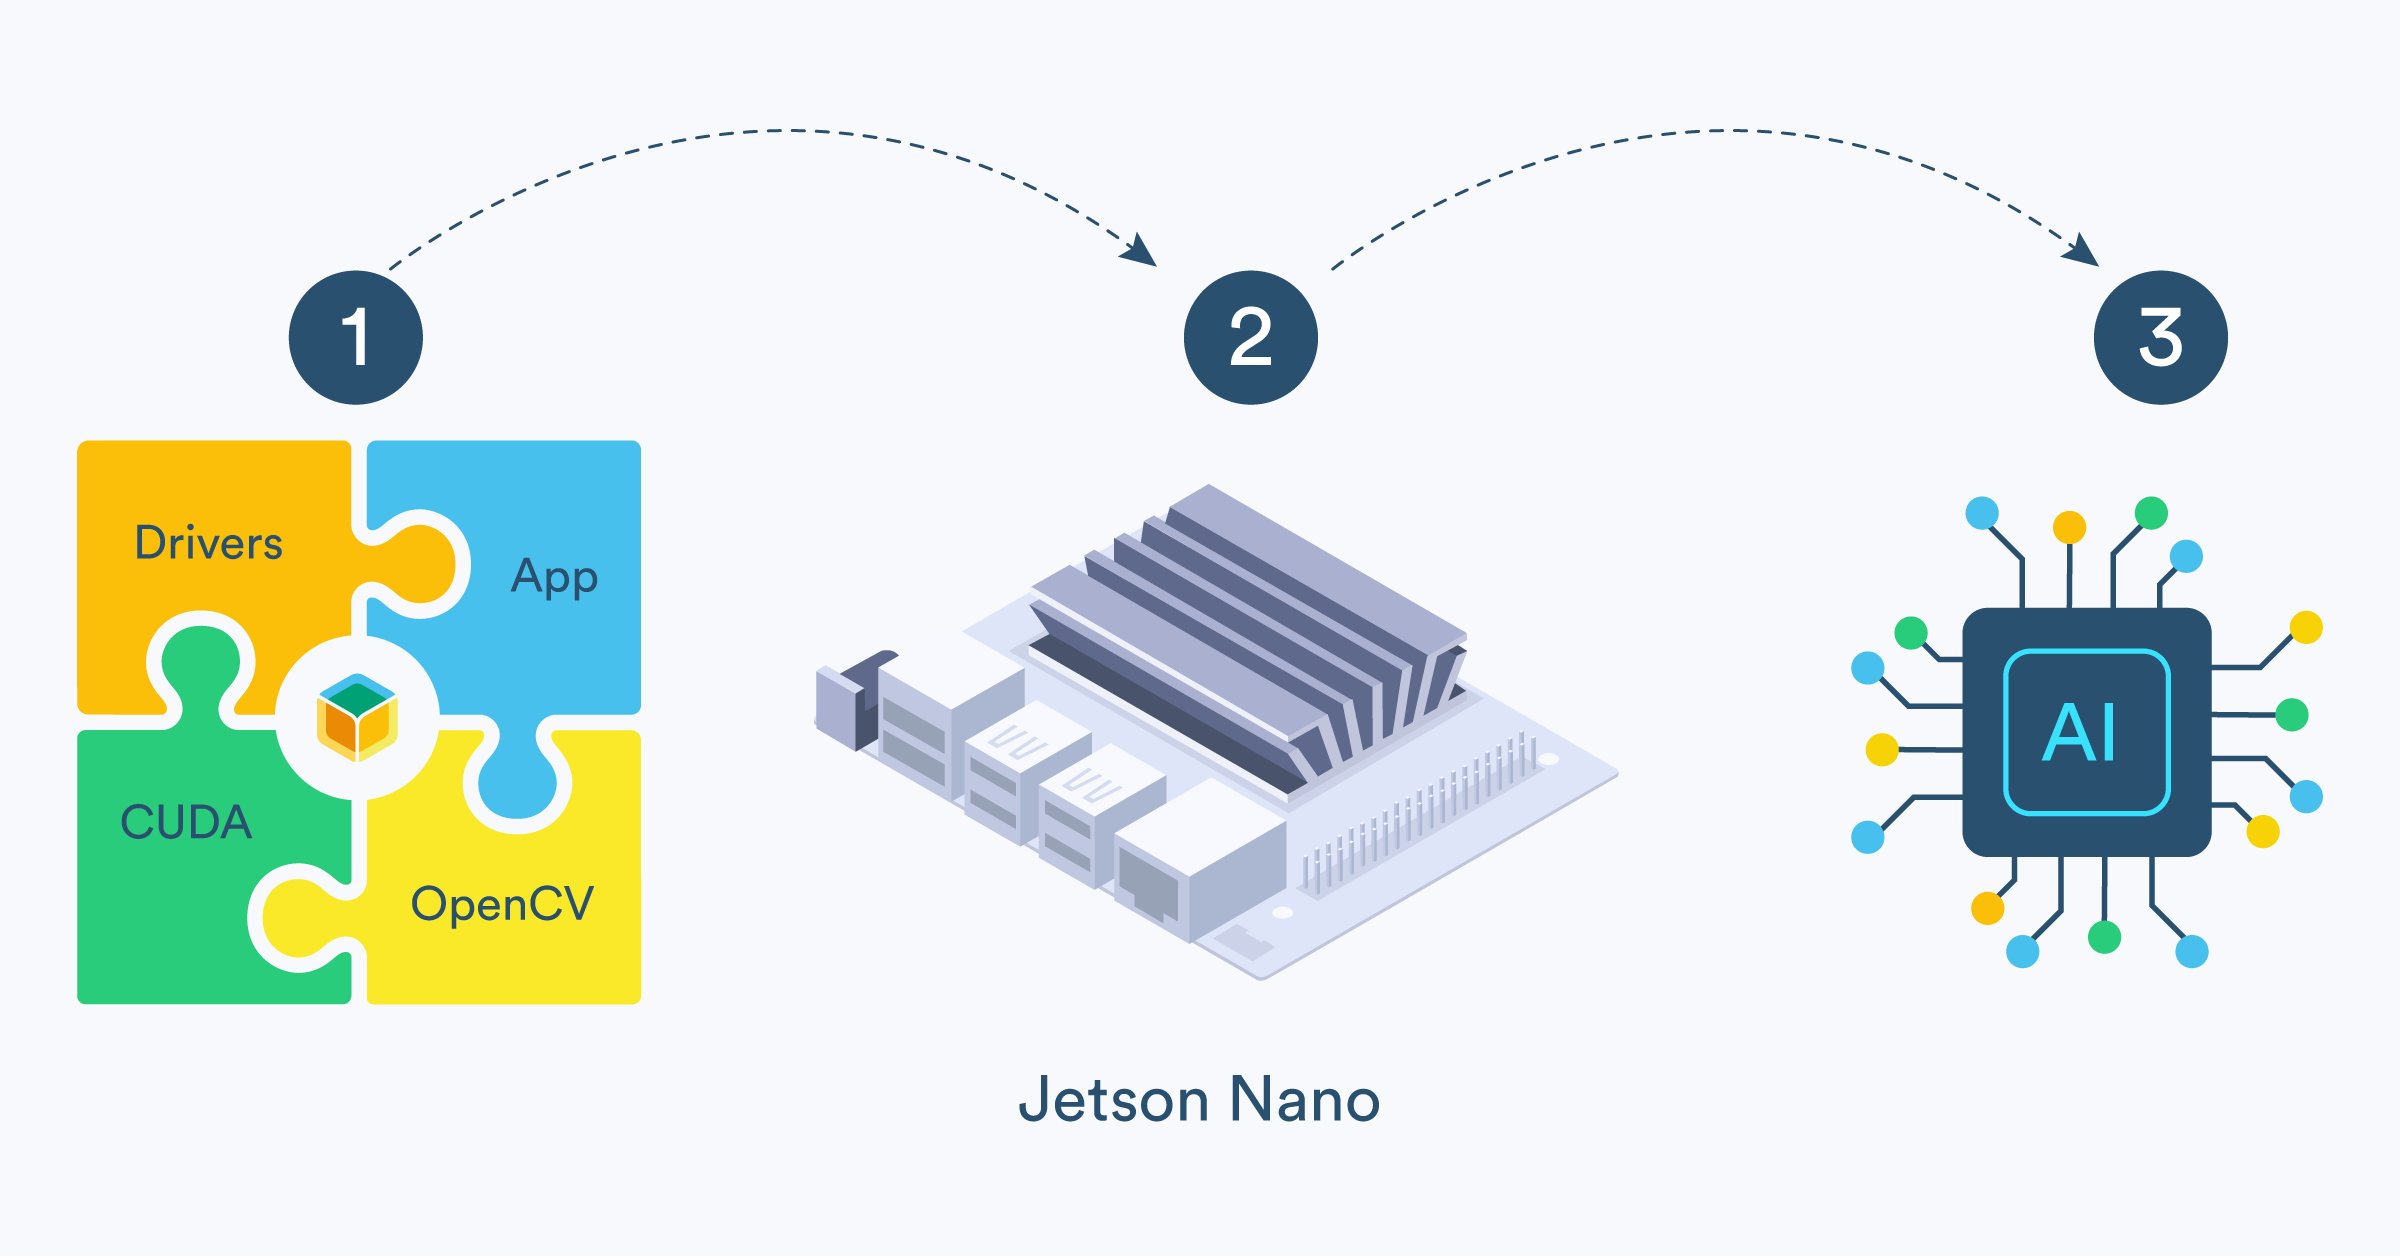 This guide shows you how to get started with the Nvidia Jetson Nano and balenaOS.